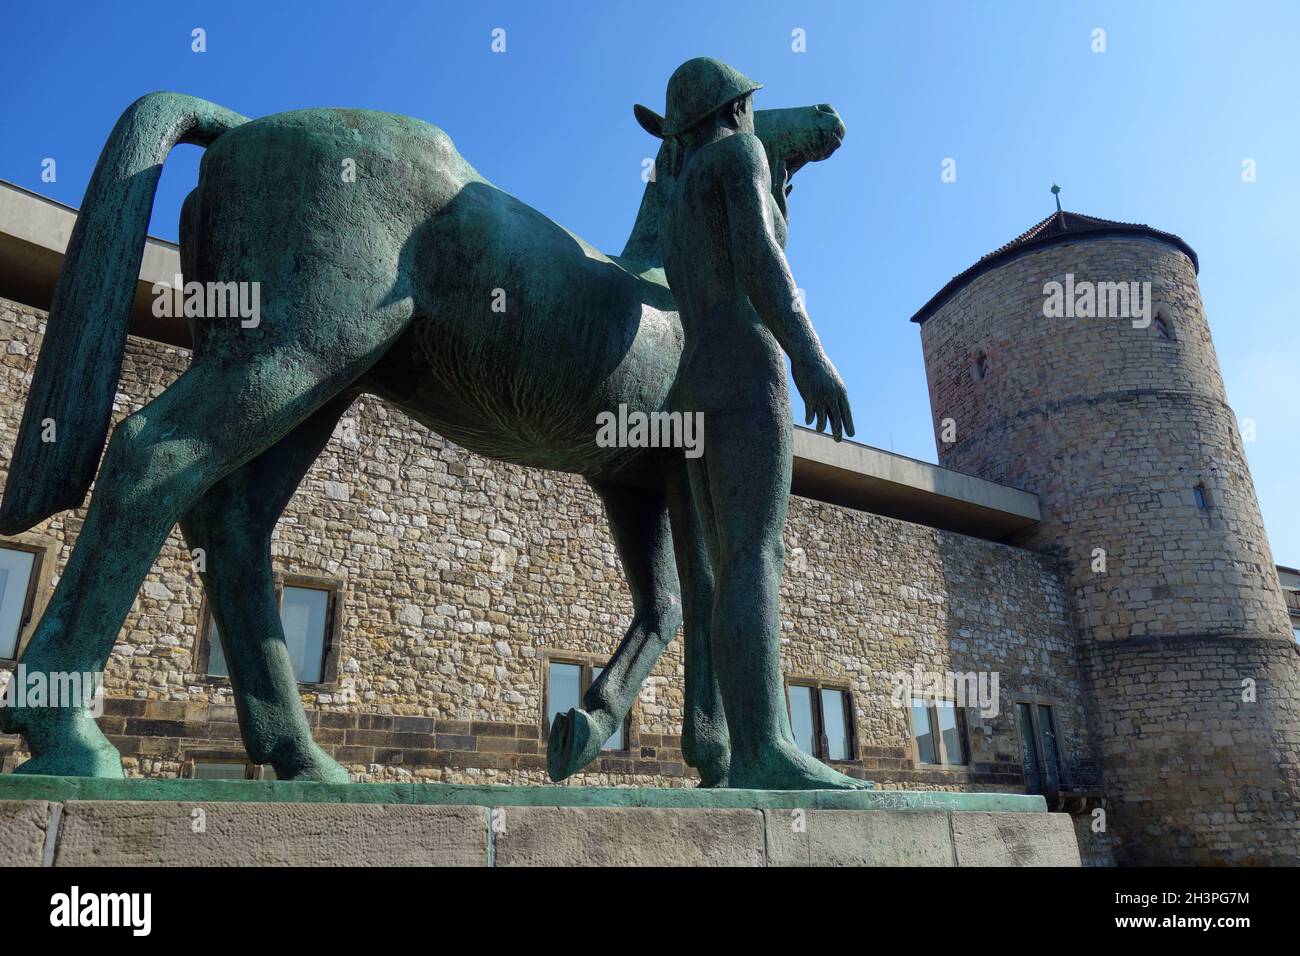 Man with horse and Begin tower in Hanover Stock Photo